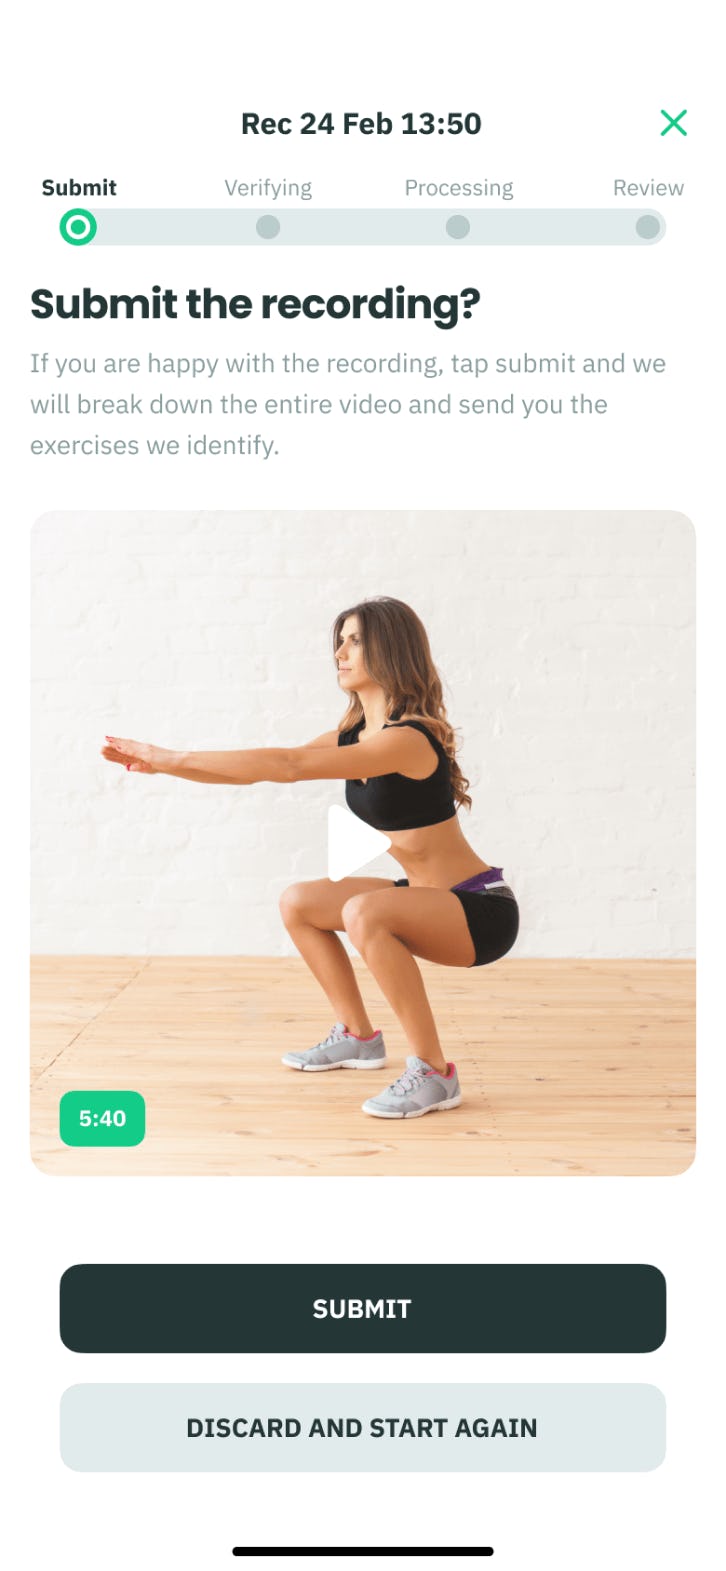 Let our AI do the exercise breakdown